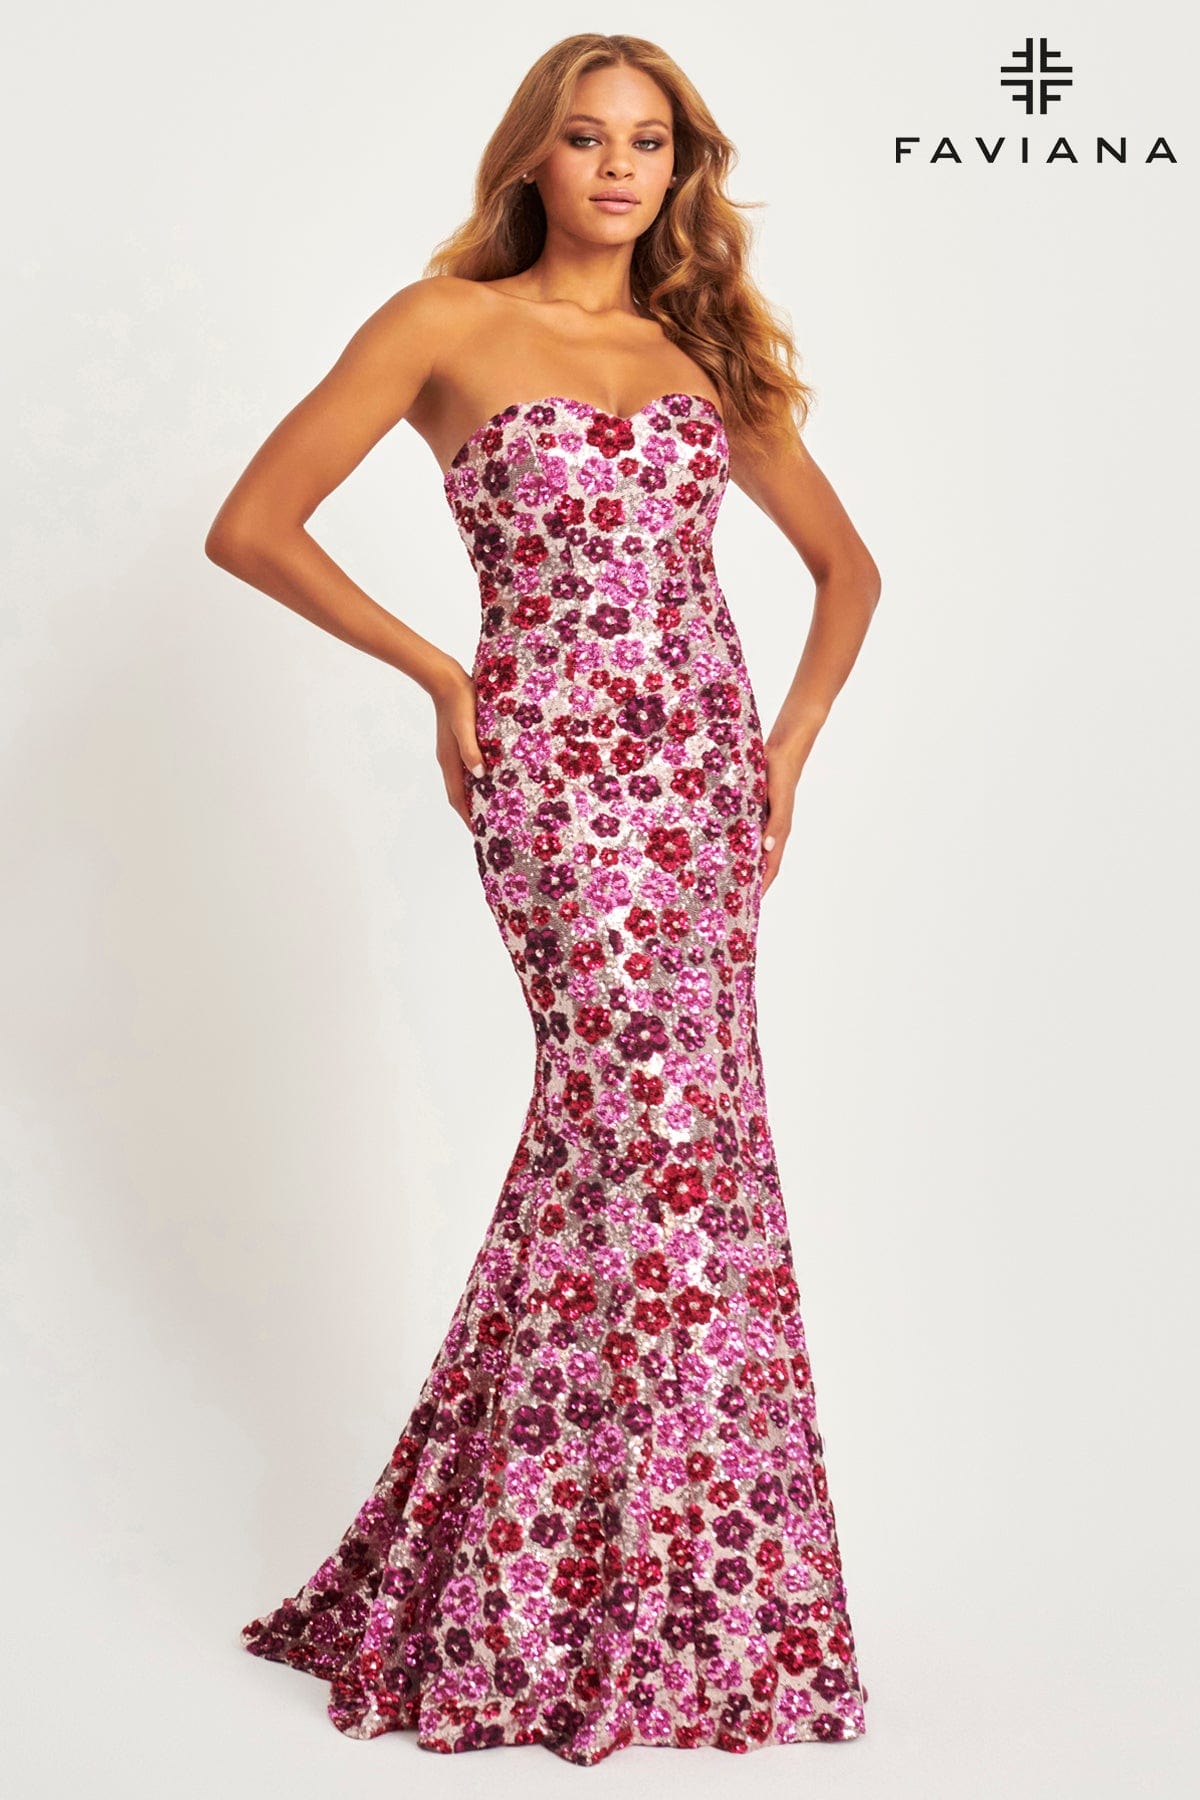 Strapless Sequin Mermaid Dress With Colorful Floral Design | 11036